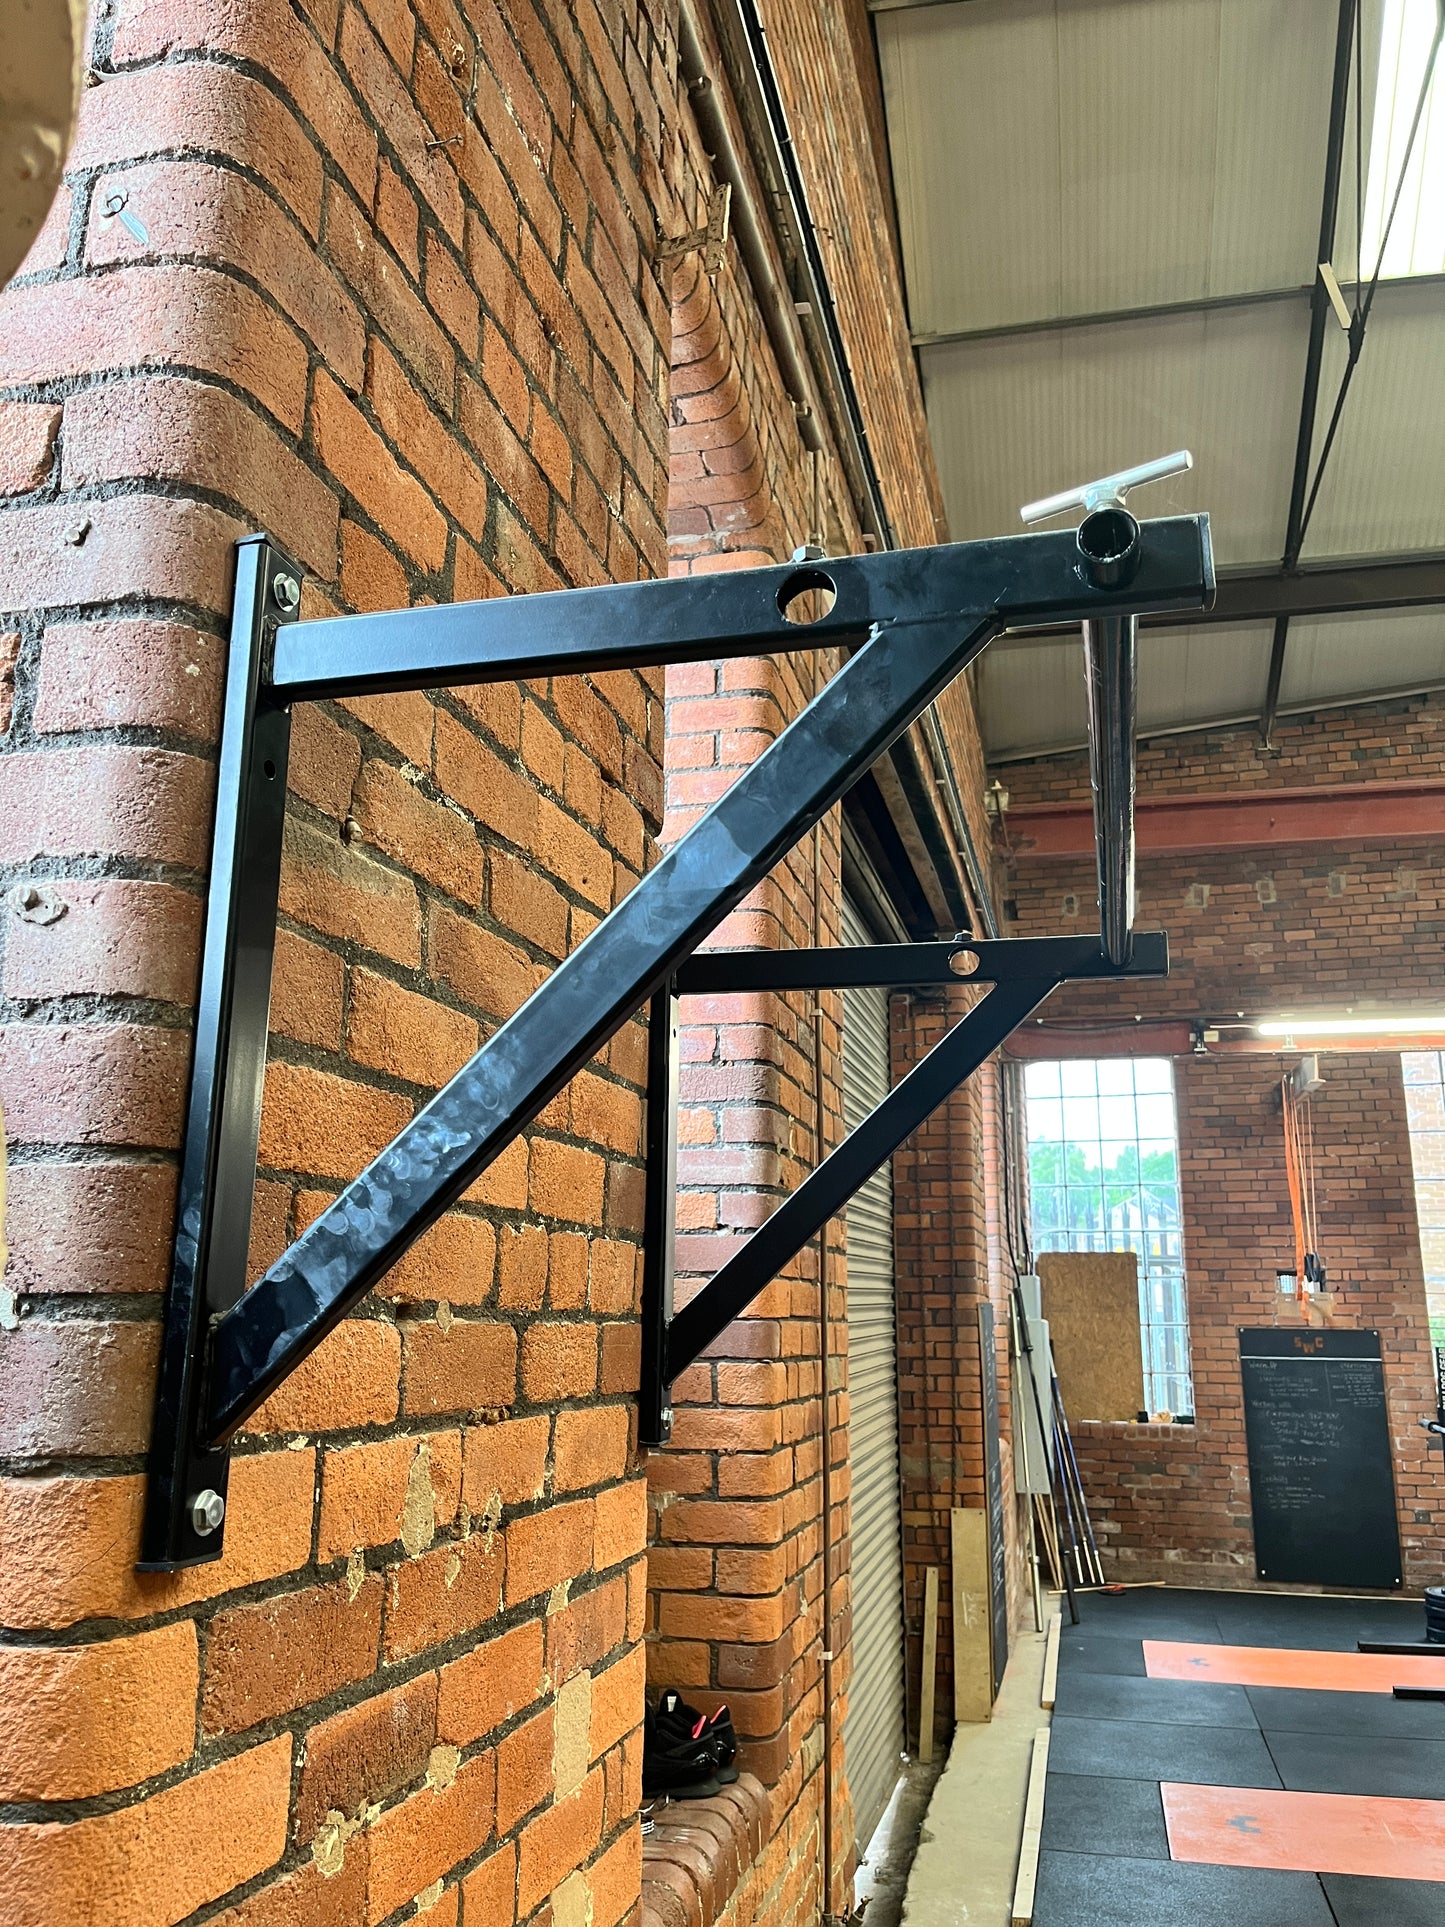 Base Fitness Wall Mounted Pull Up Bar